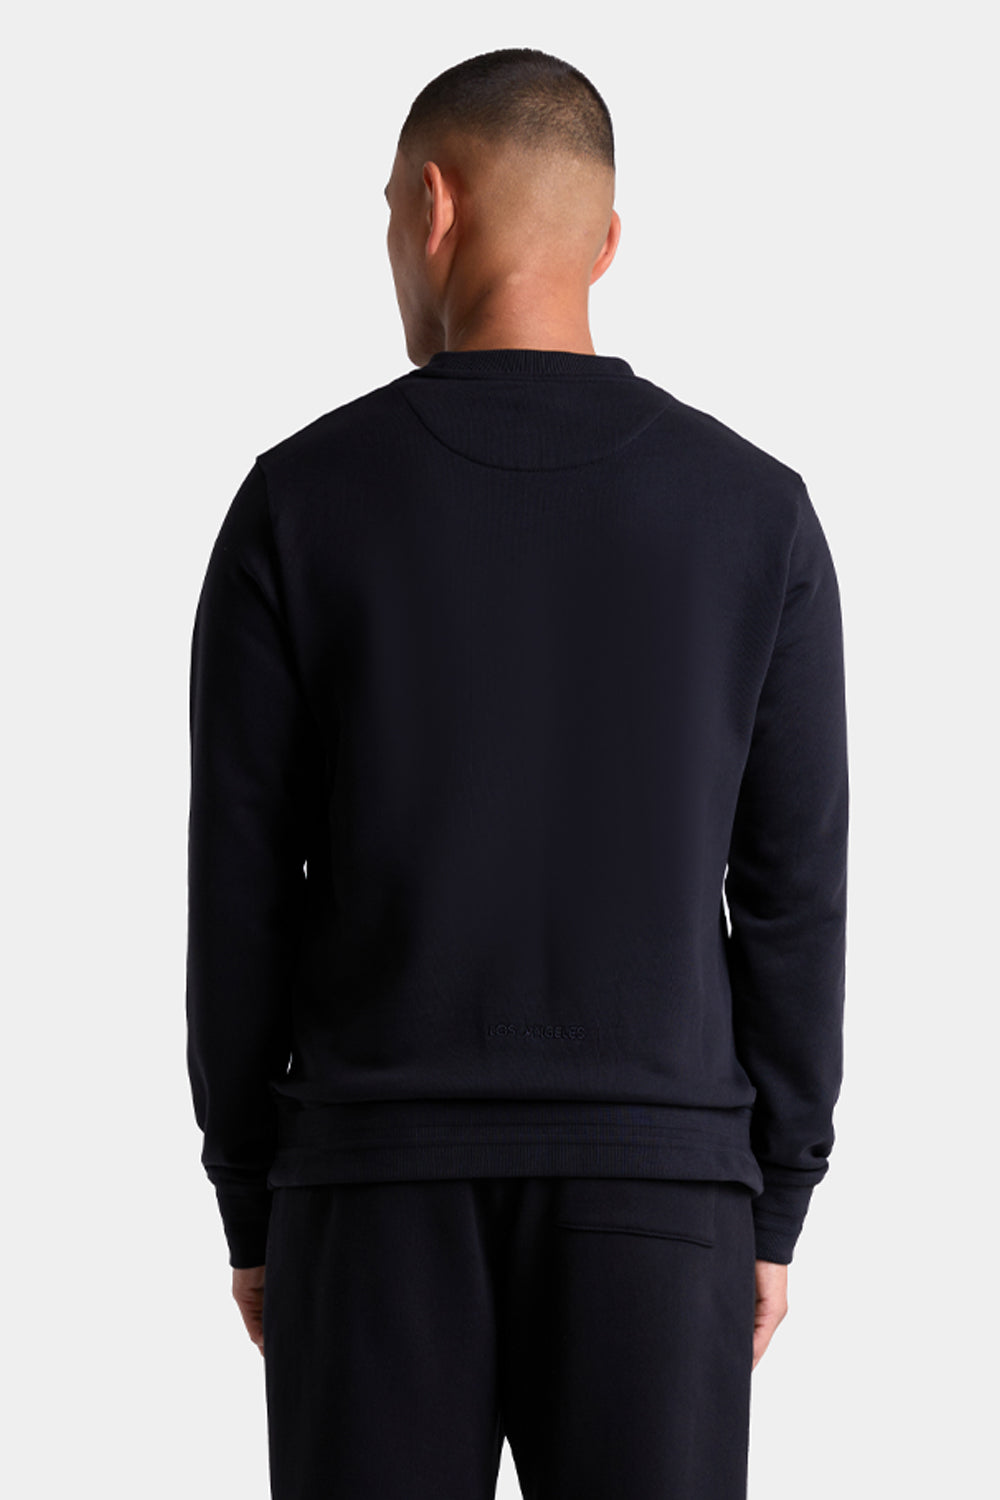 Buy the Android Homme Embroidered Android Homme Crew Sweatshirt Black at Intro. Spend £50 for free UK delivery. Official stockists. We ship worldwide.